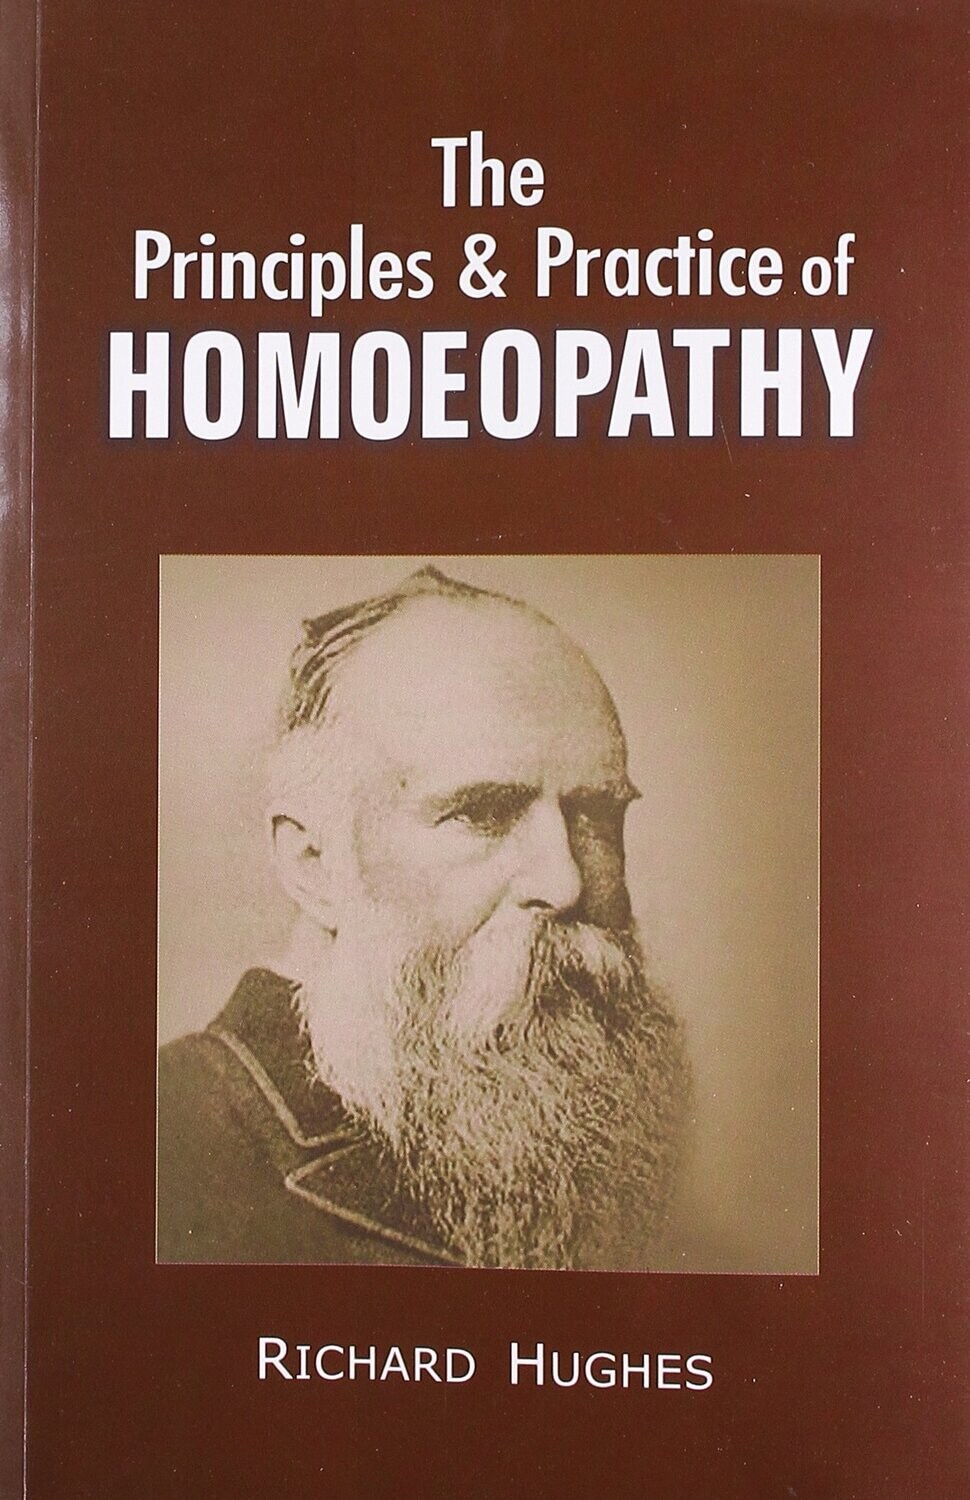 The principles and practice of homoeopathy* (Hughes)